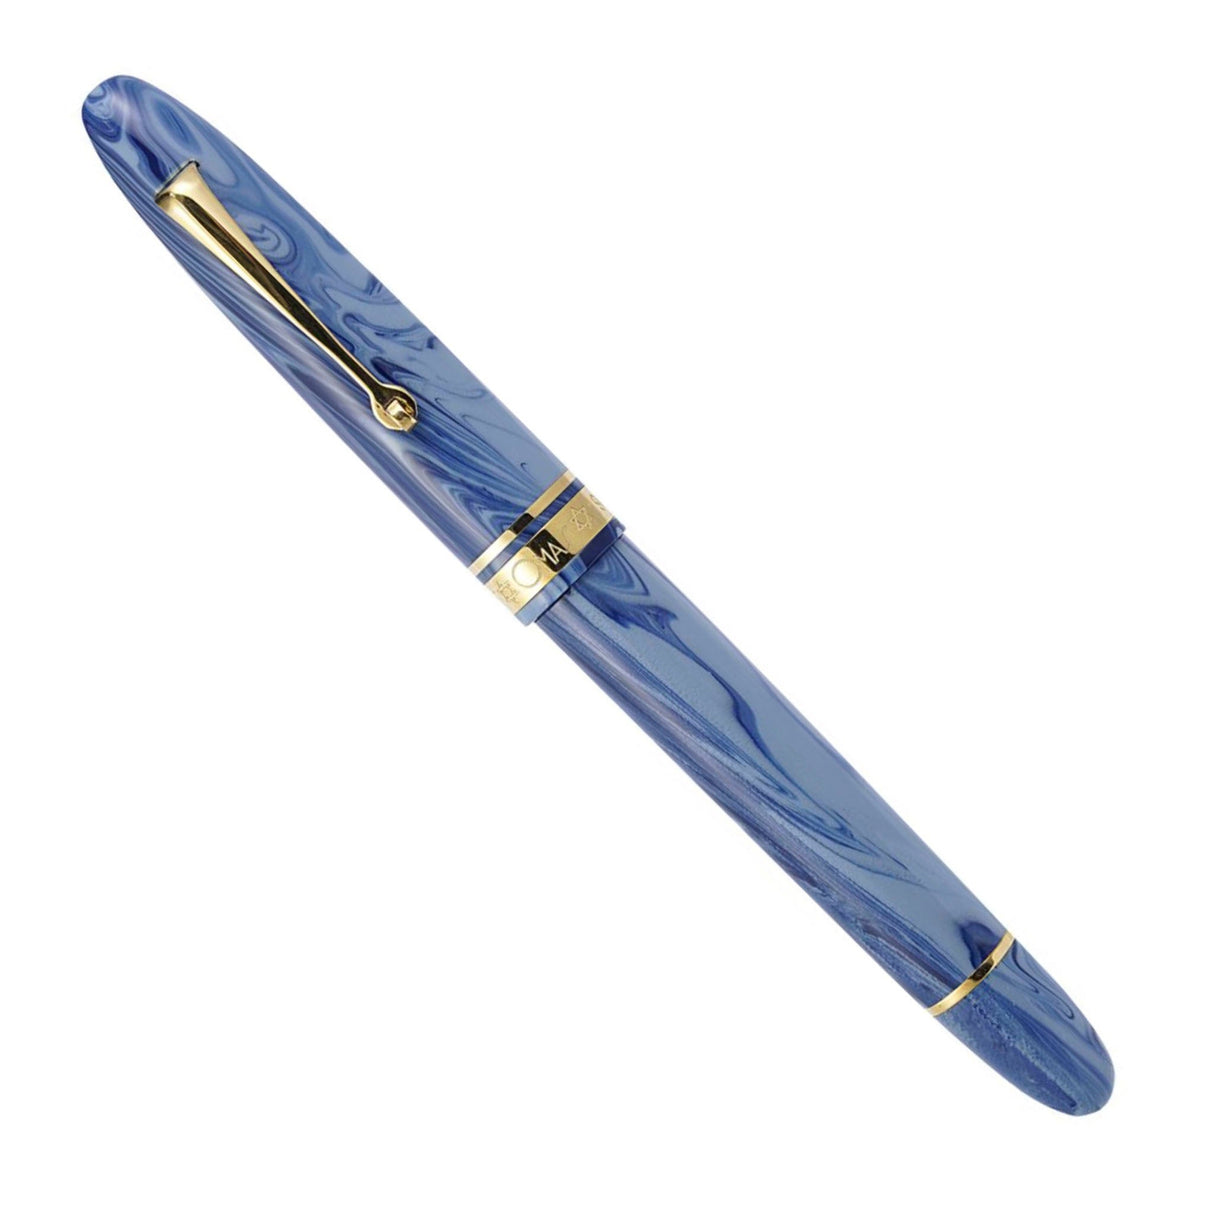 Omas Ogiva Israel 75th Anniversary Blue with Gold Trim - Fountain Pen